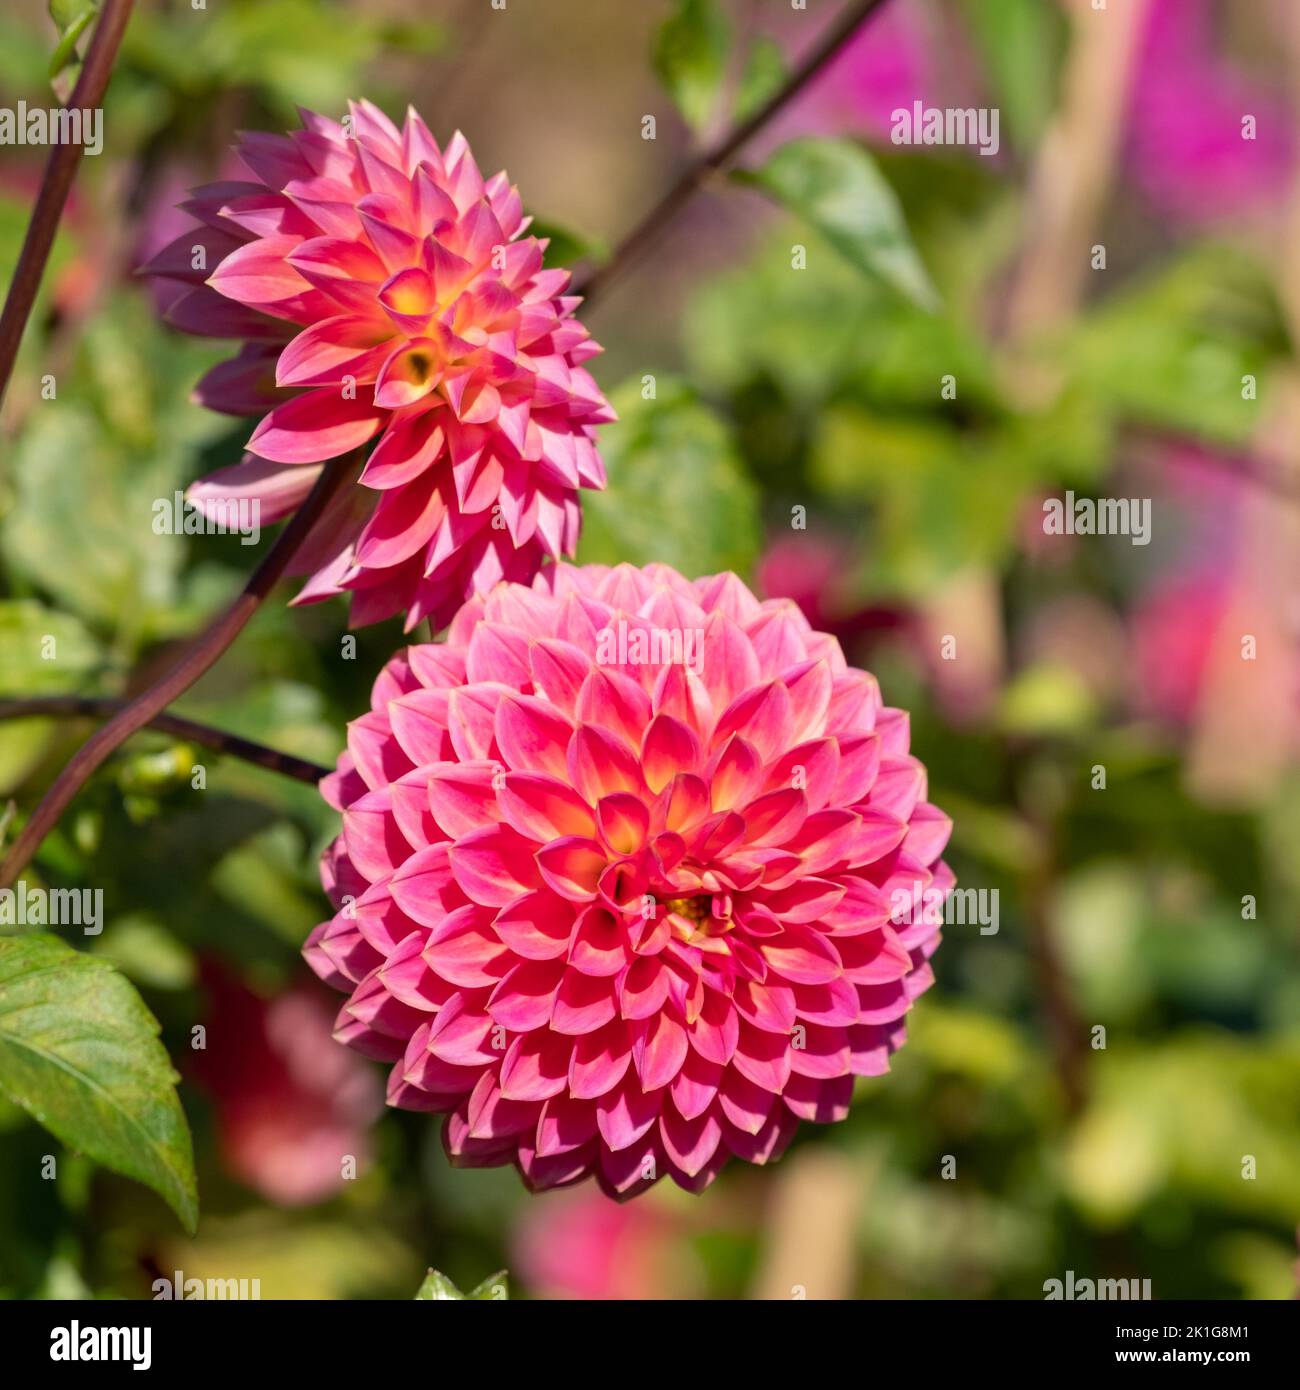 Stunning dark pink dahlia flowers by ame Polventon Kristobel, photographed with a macro lens on a sunny day in early autumn at RHS Wisley garden, UK. Stock Photo